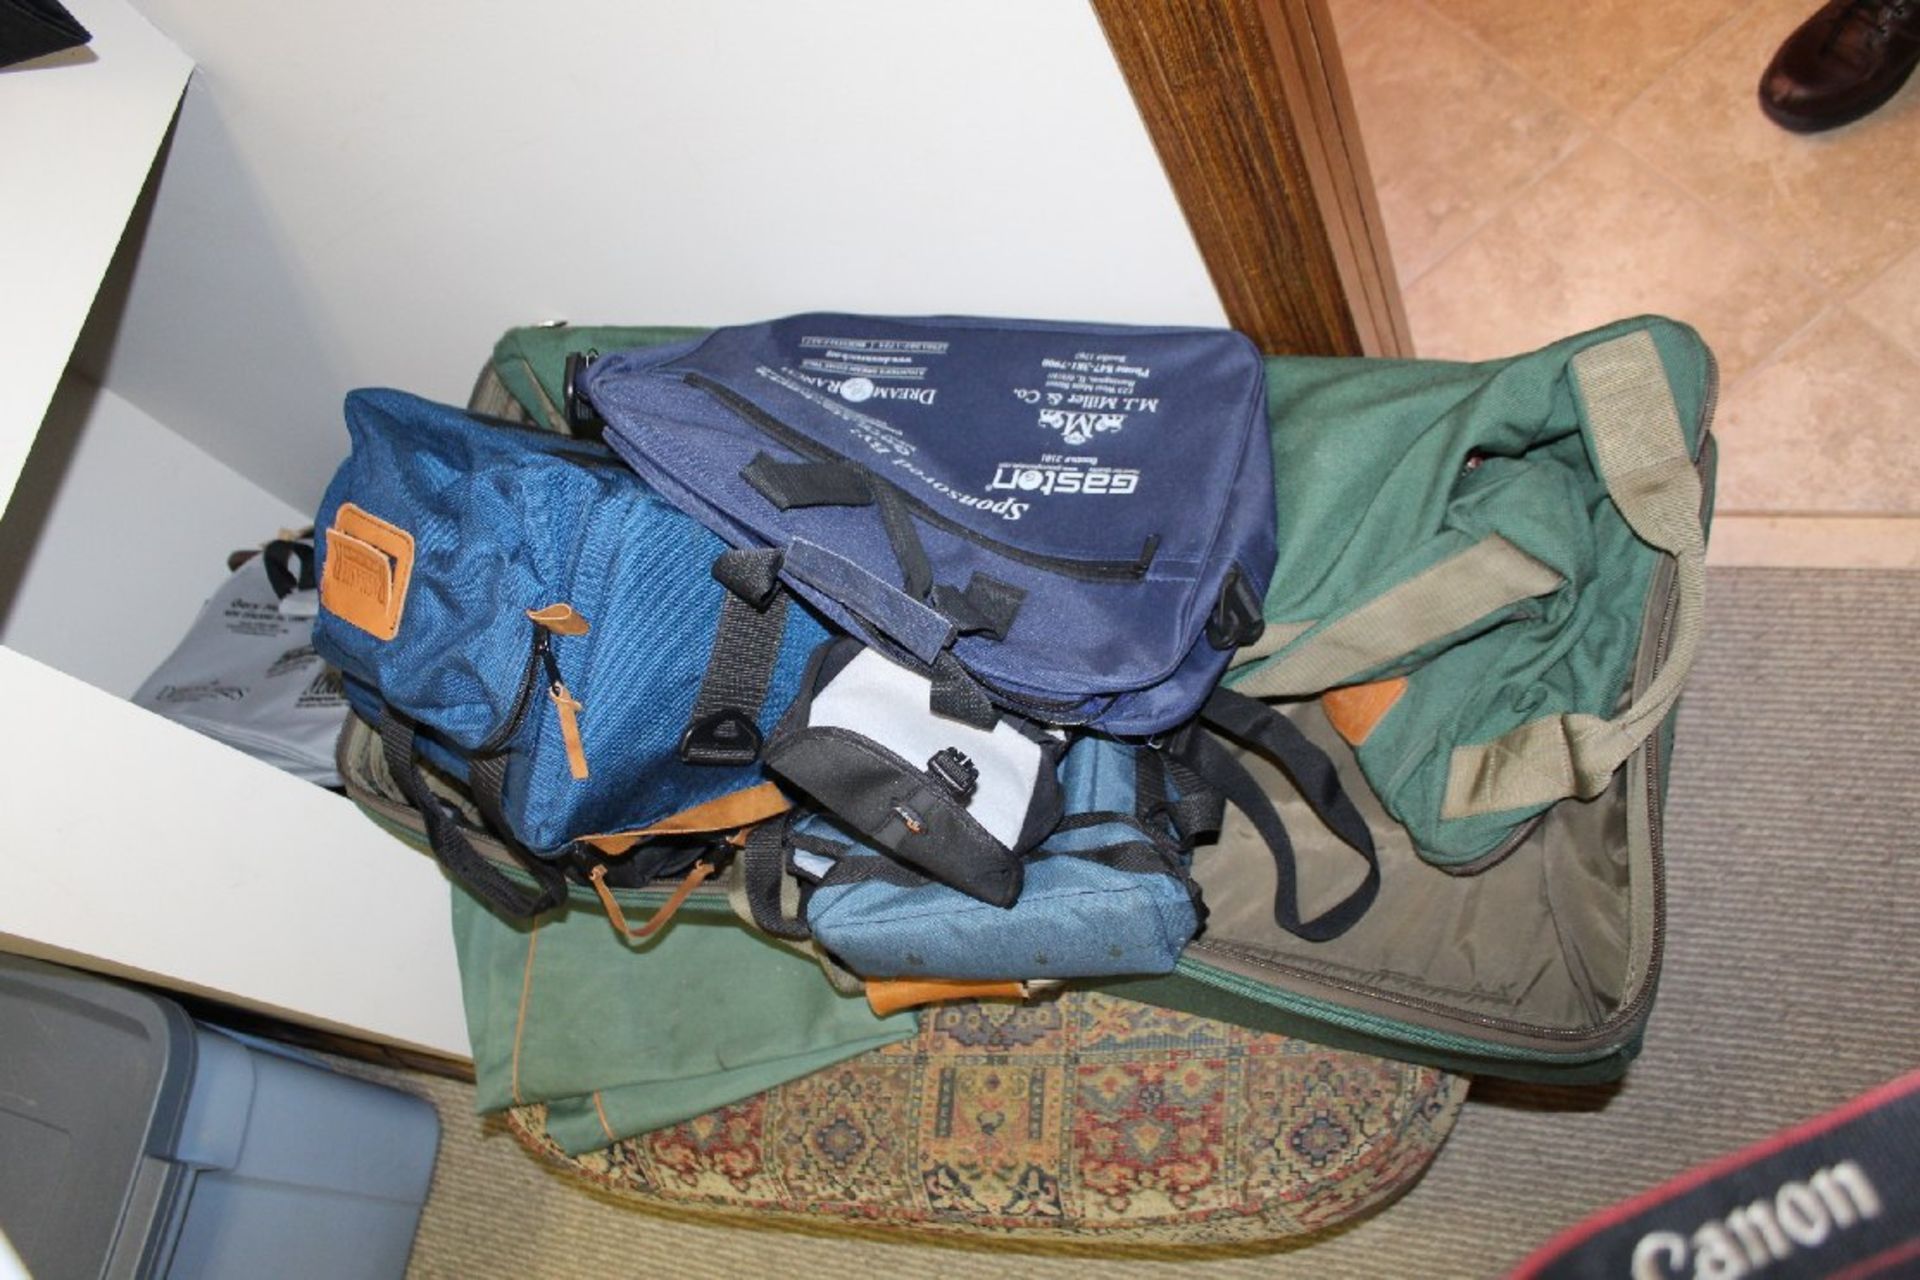 Contents of Closet, Assorted Hunting/Outdoor Clothing, Luggage, Office Supplies, Prints, Boots, - Image 10 of 10